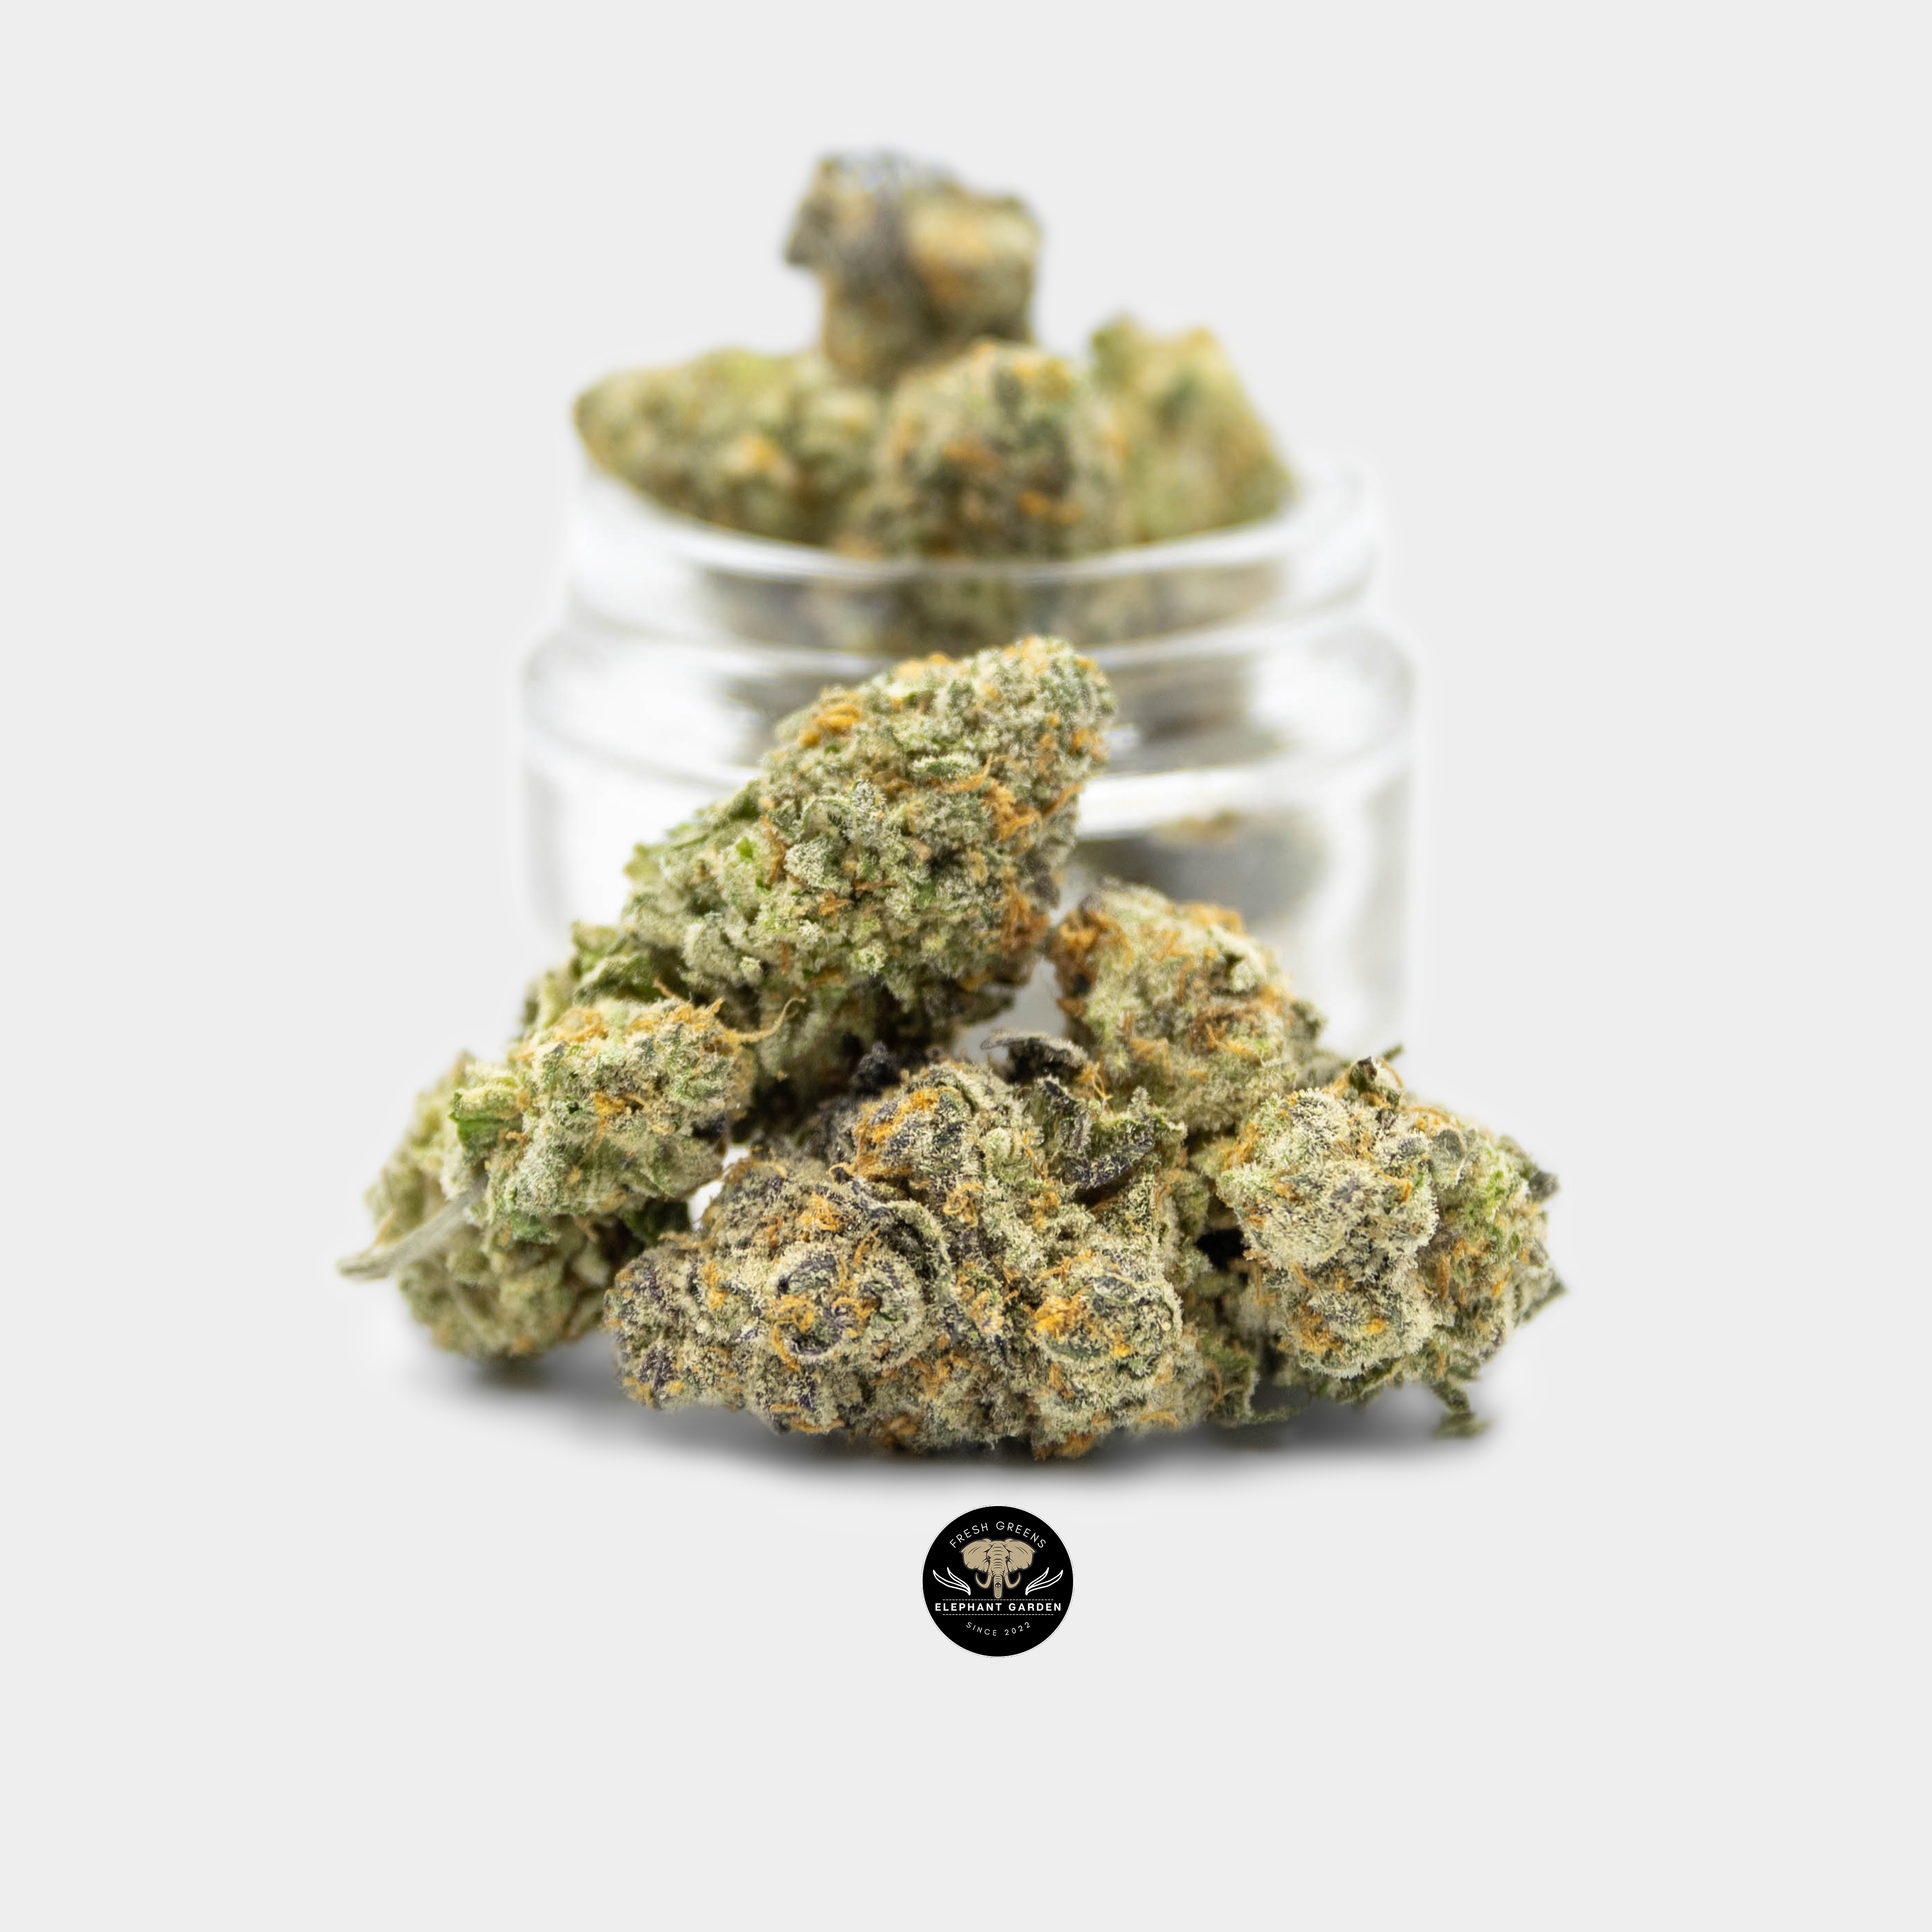 Buy Strawberry and Cream at Elephant Garden Co Weed Dispensary Online Canada Single